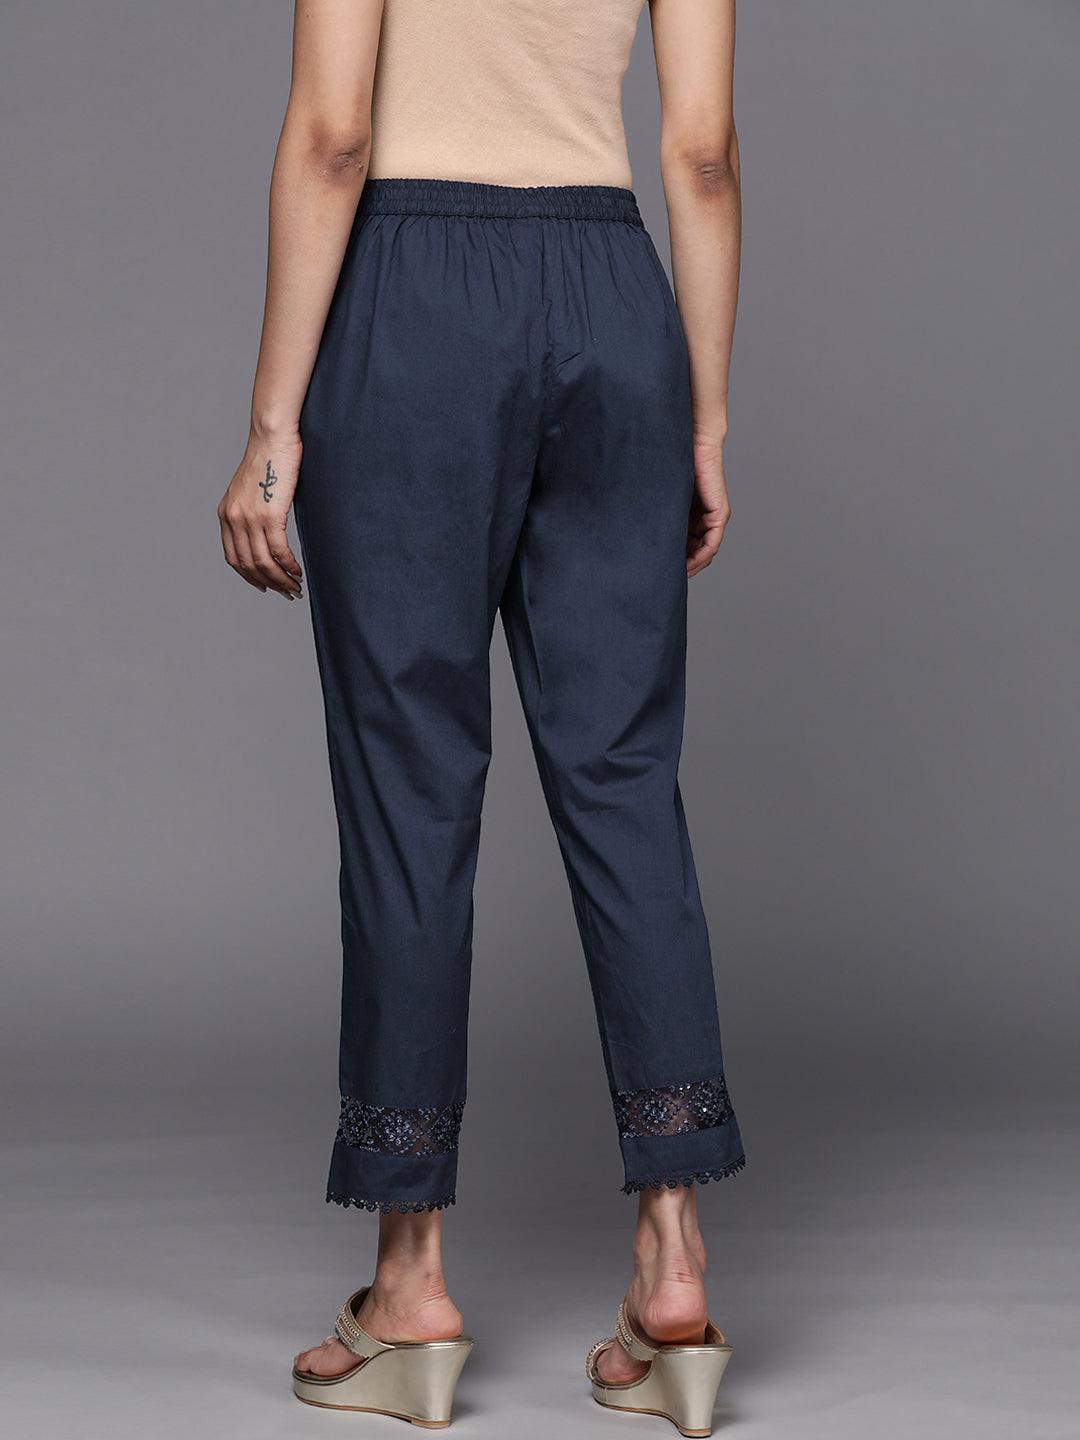 Navy Blue Solid Cotton Trousers - Libas